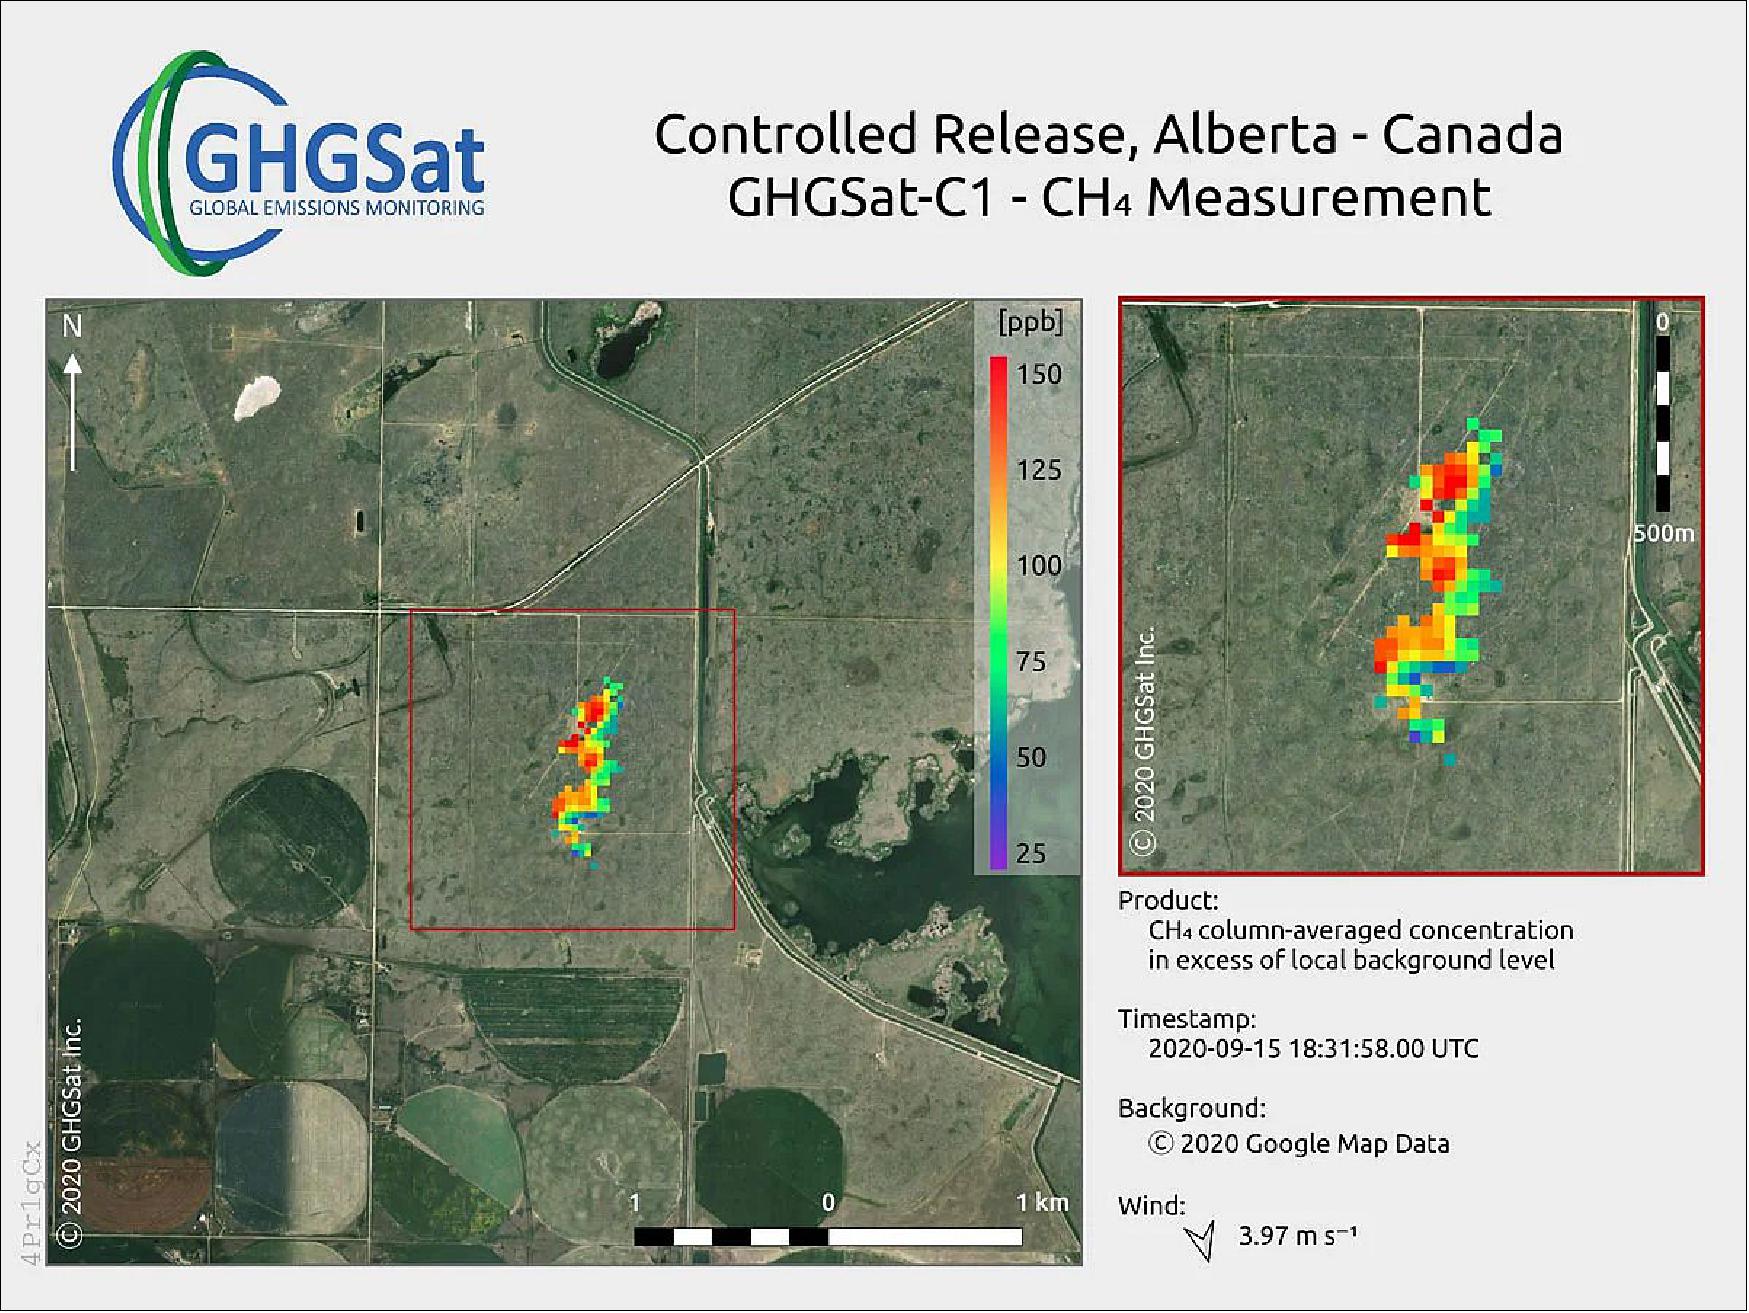 Figure 17: This image was taken on 15 September 2020, by GHGSat’s second satellite Iris. The spacecraft was tasked with measuring a controlled release of methane from a facility in Alberta, Canada. Ground measurements of the controlled release confirmed an emission rate of 260 kg CH4/hr. Iris maps plumes of methane in the atmosphere down to 25 m on the ground, detecting and measuring emissions from point sources 100 times smaller than any comparable system with a resolution 100 times higher, comparable to the emissions from a large landfill. GHGSat Inc. created the sample image by colorizing the methane concentration measurements that exceeded normal background levels captured over the Alberta test site. The colorized measurements are overlaid on an aerial photograph to provide context (image credit: GHGSat)